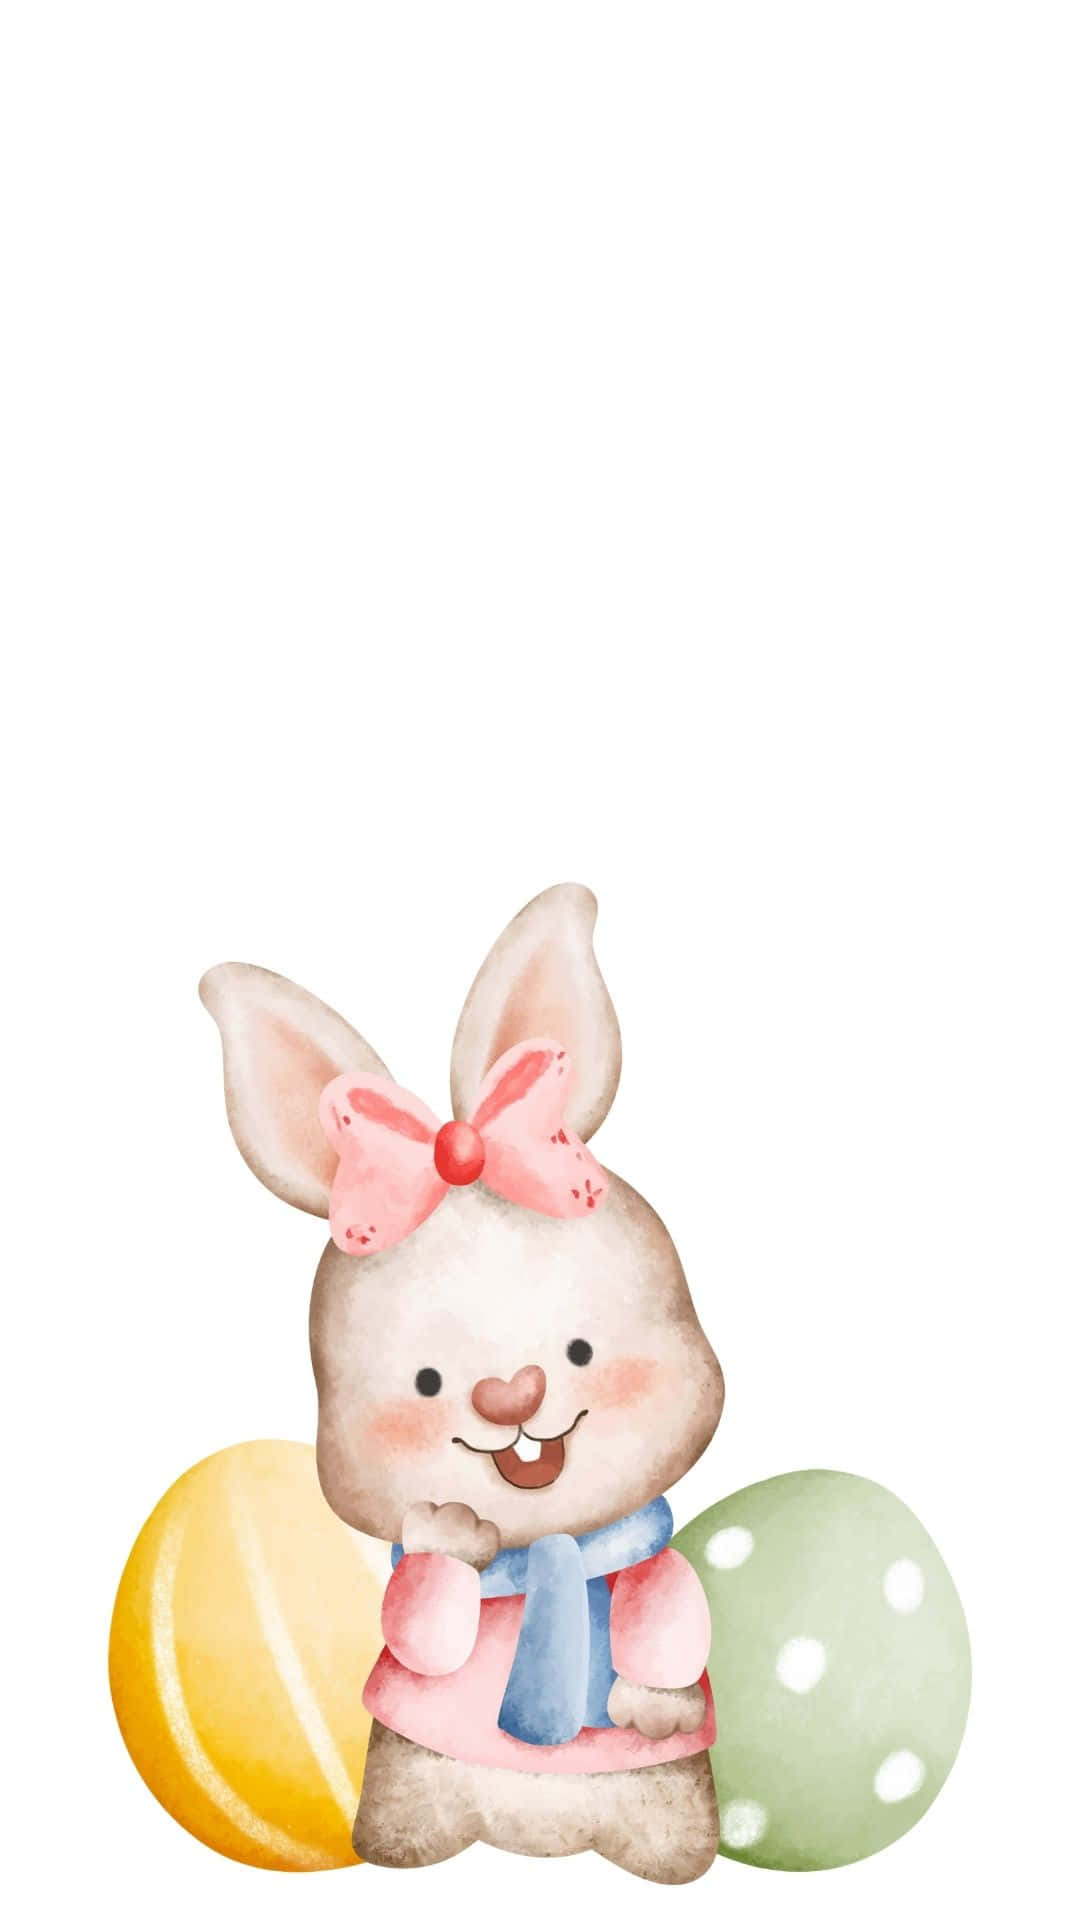 The Easter Bunny is Ready to Deliver Easter Cheer! Wallpaper